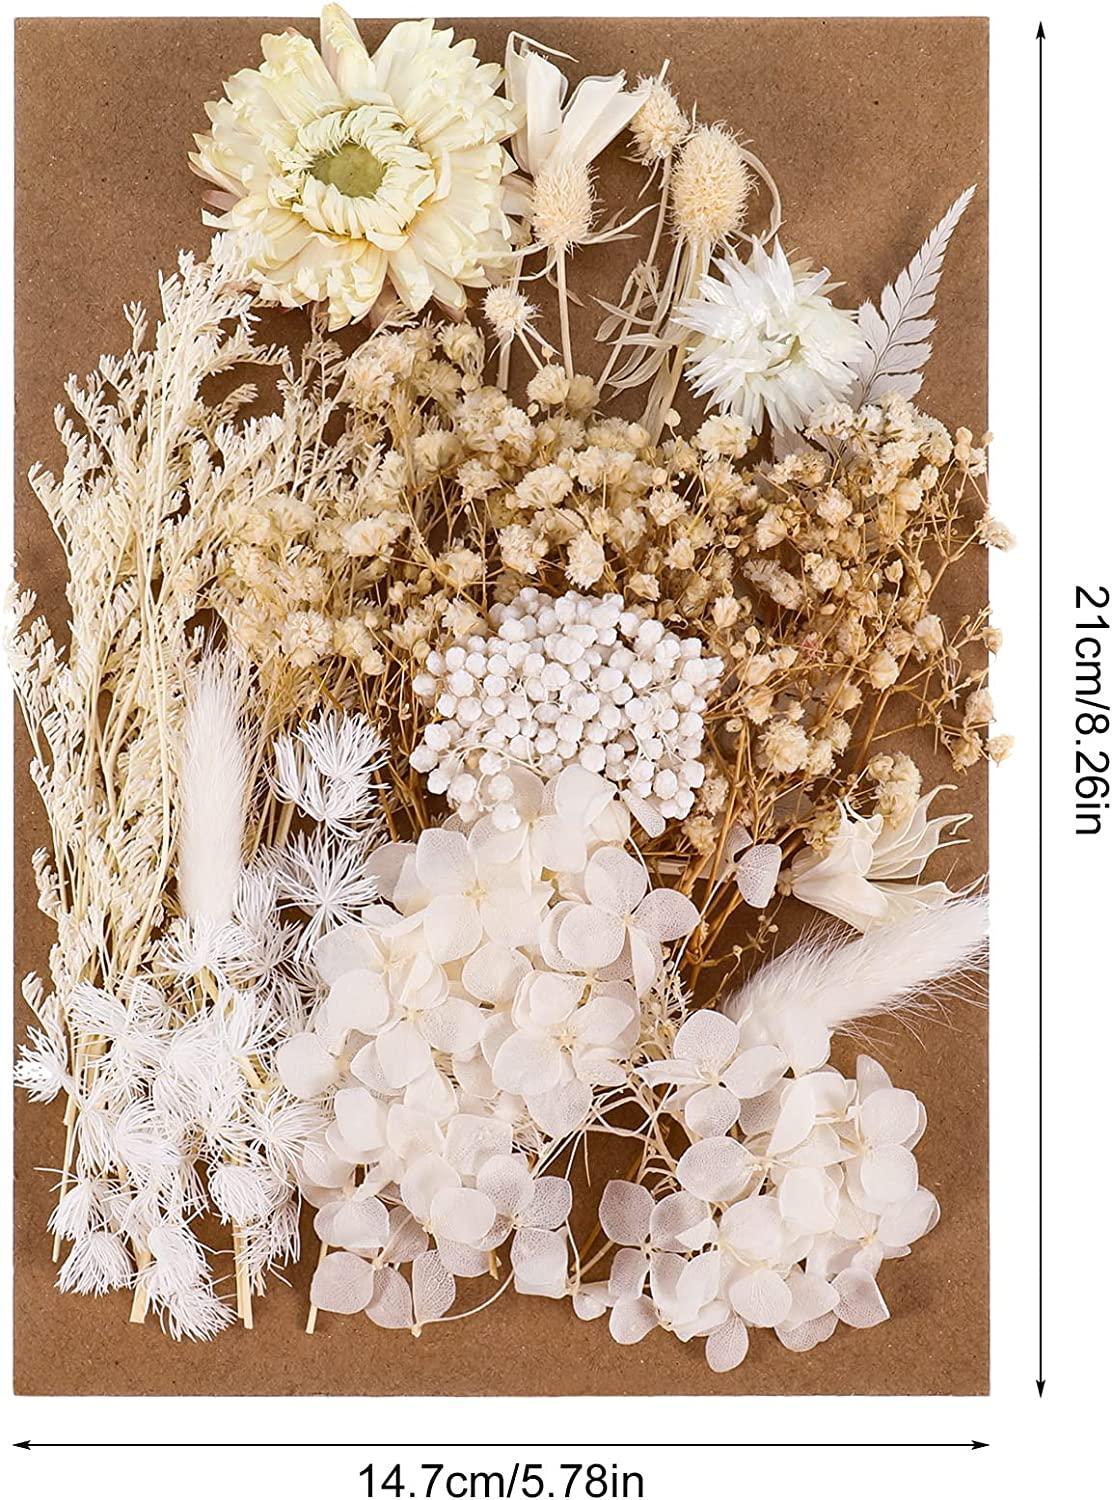 AhlsenL Real Dried Flowers Natural Dried Flowers Mixed Hydrangeas